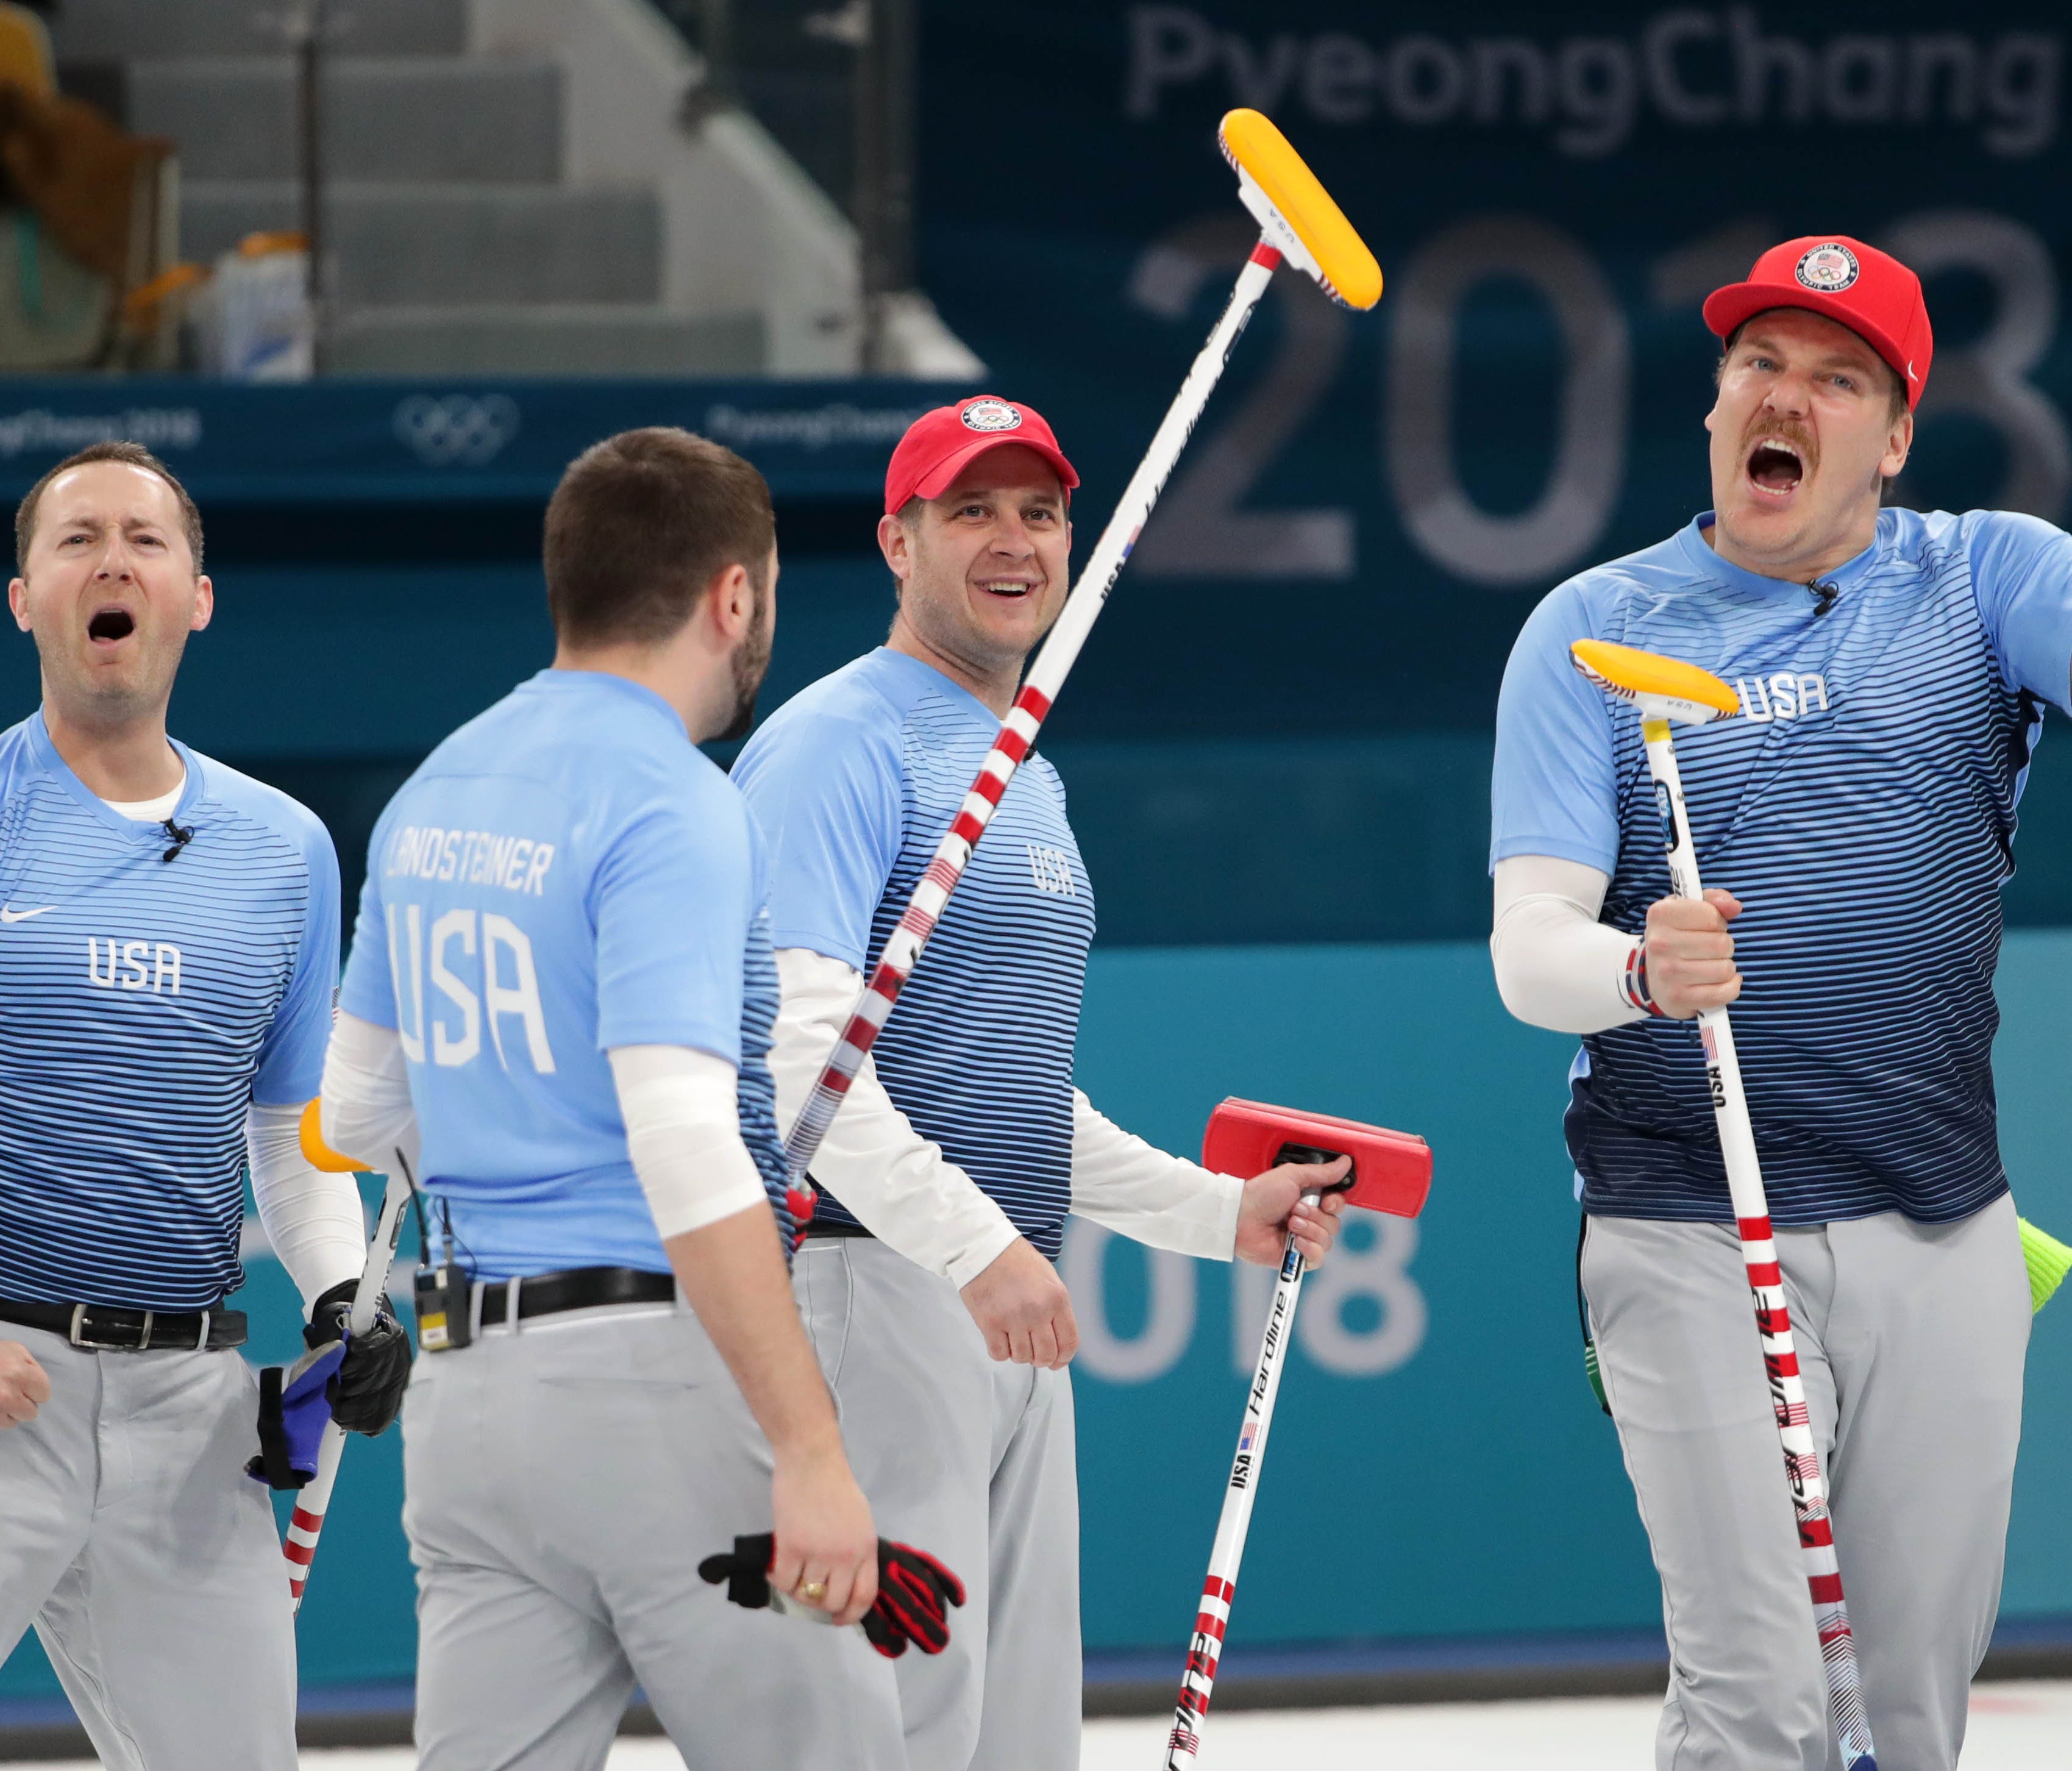 Team USA celebrates after defeating Canada in the men's curling semifinals.